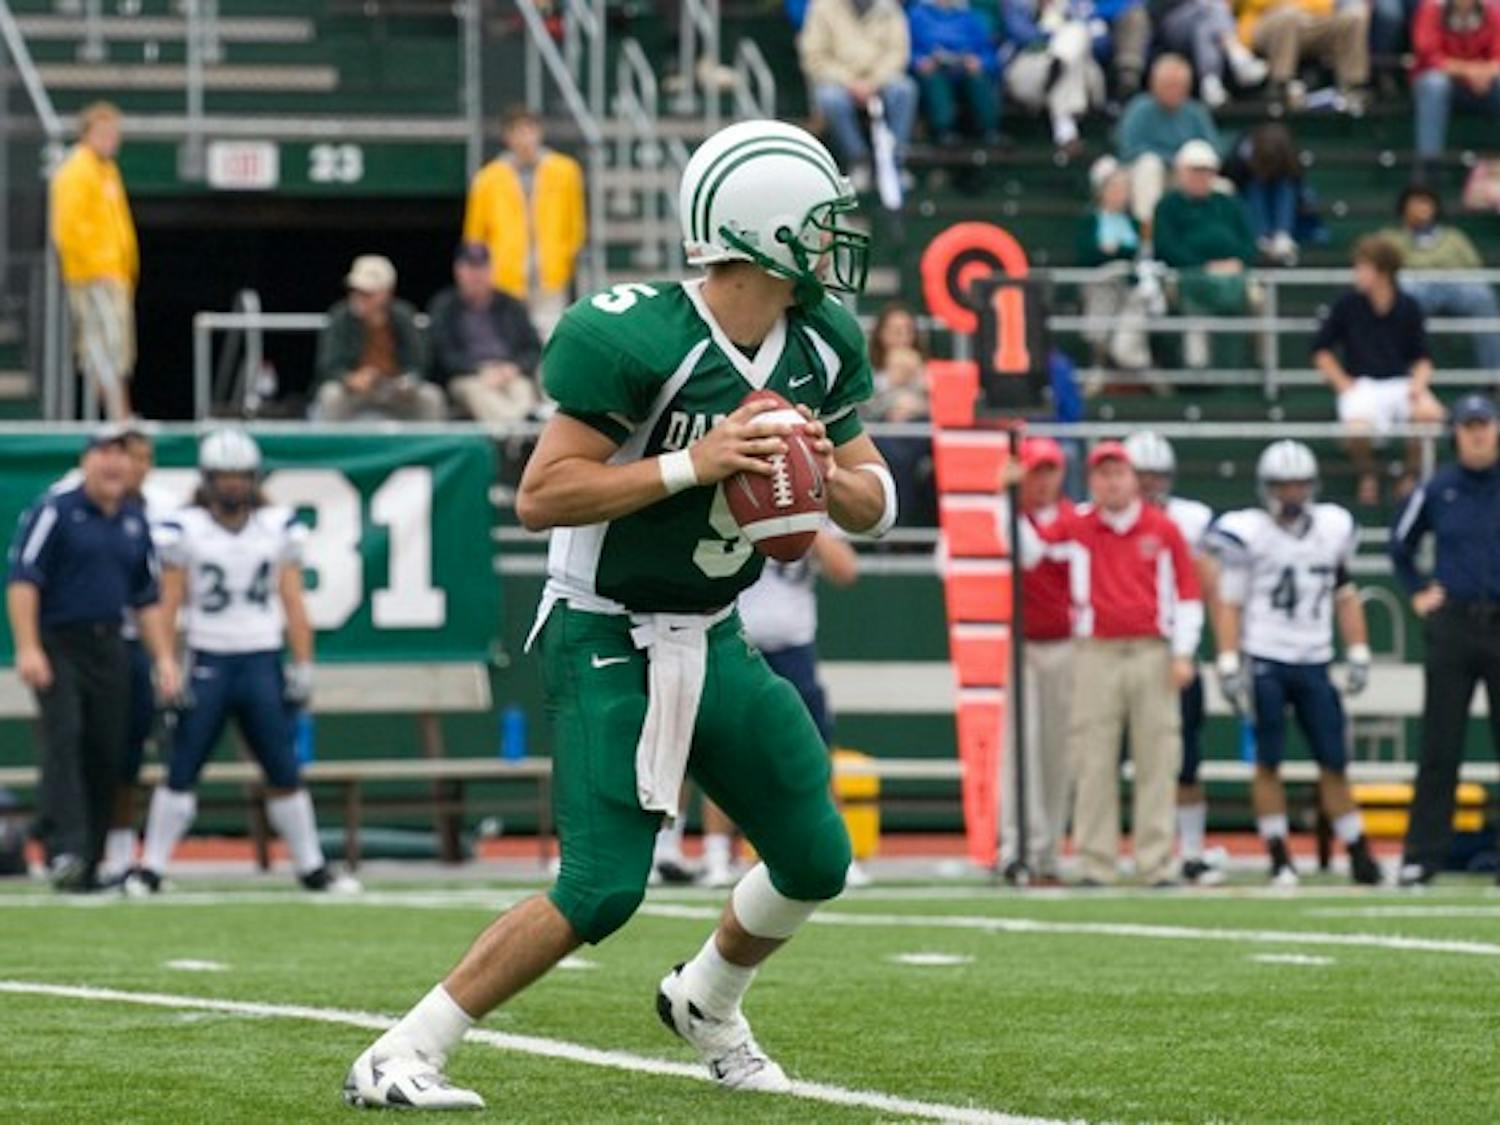 Big Green quarterback Alex Jenny '10 completed 11 of 28 passes for 147 yards and one touchdown on Saturday.